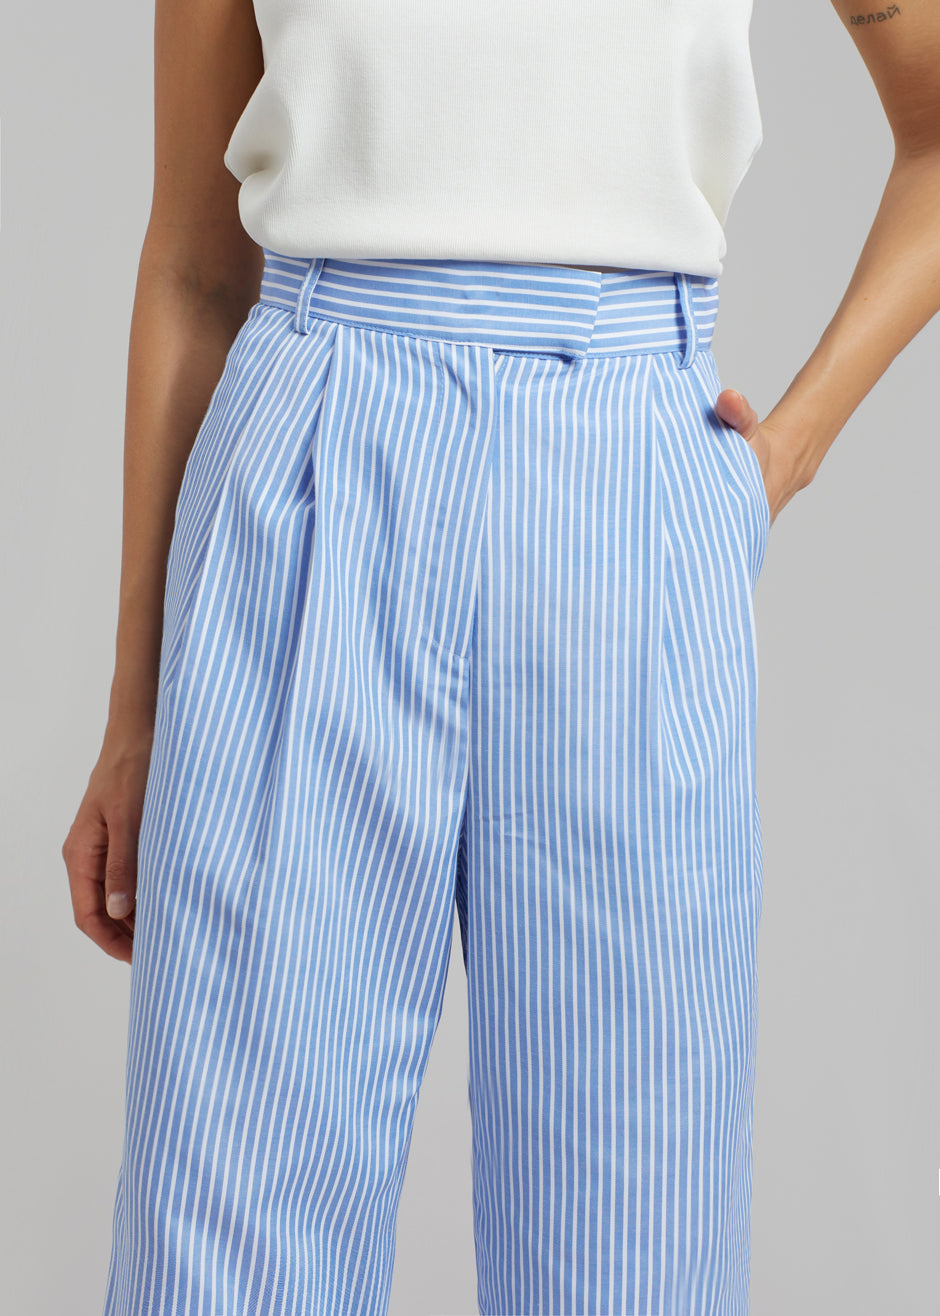 Buy Men's White Striped Cotton Lounge Pants Online in India at Bewakoof